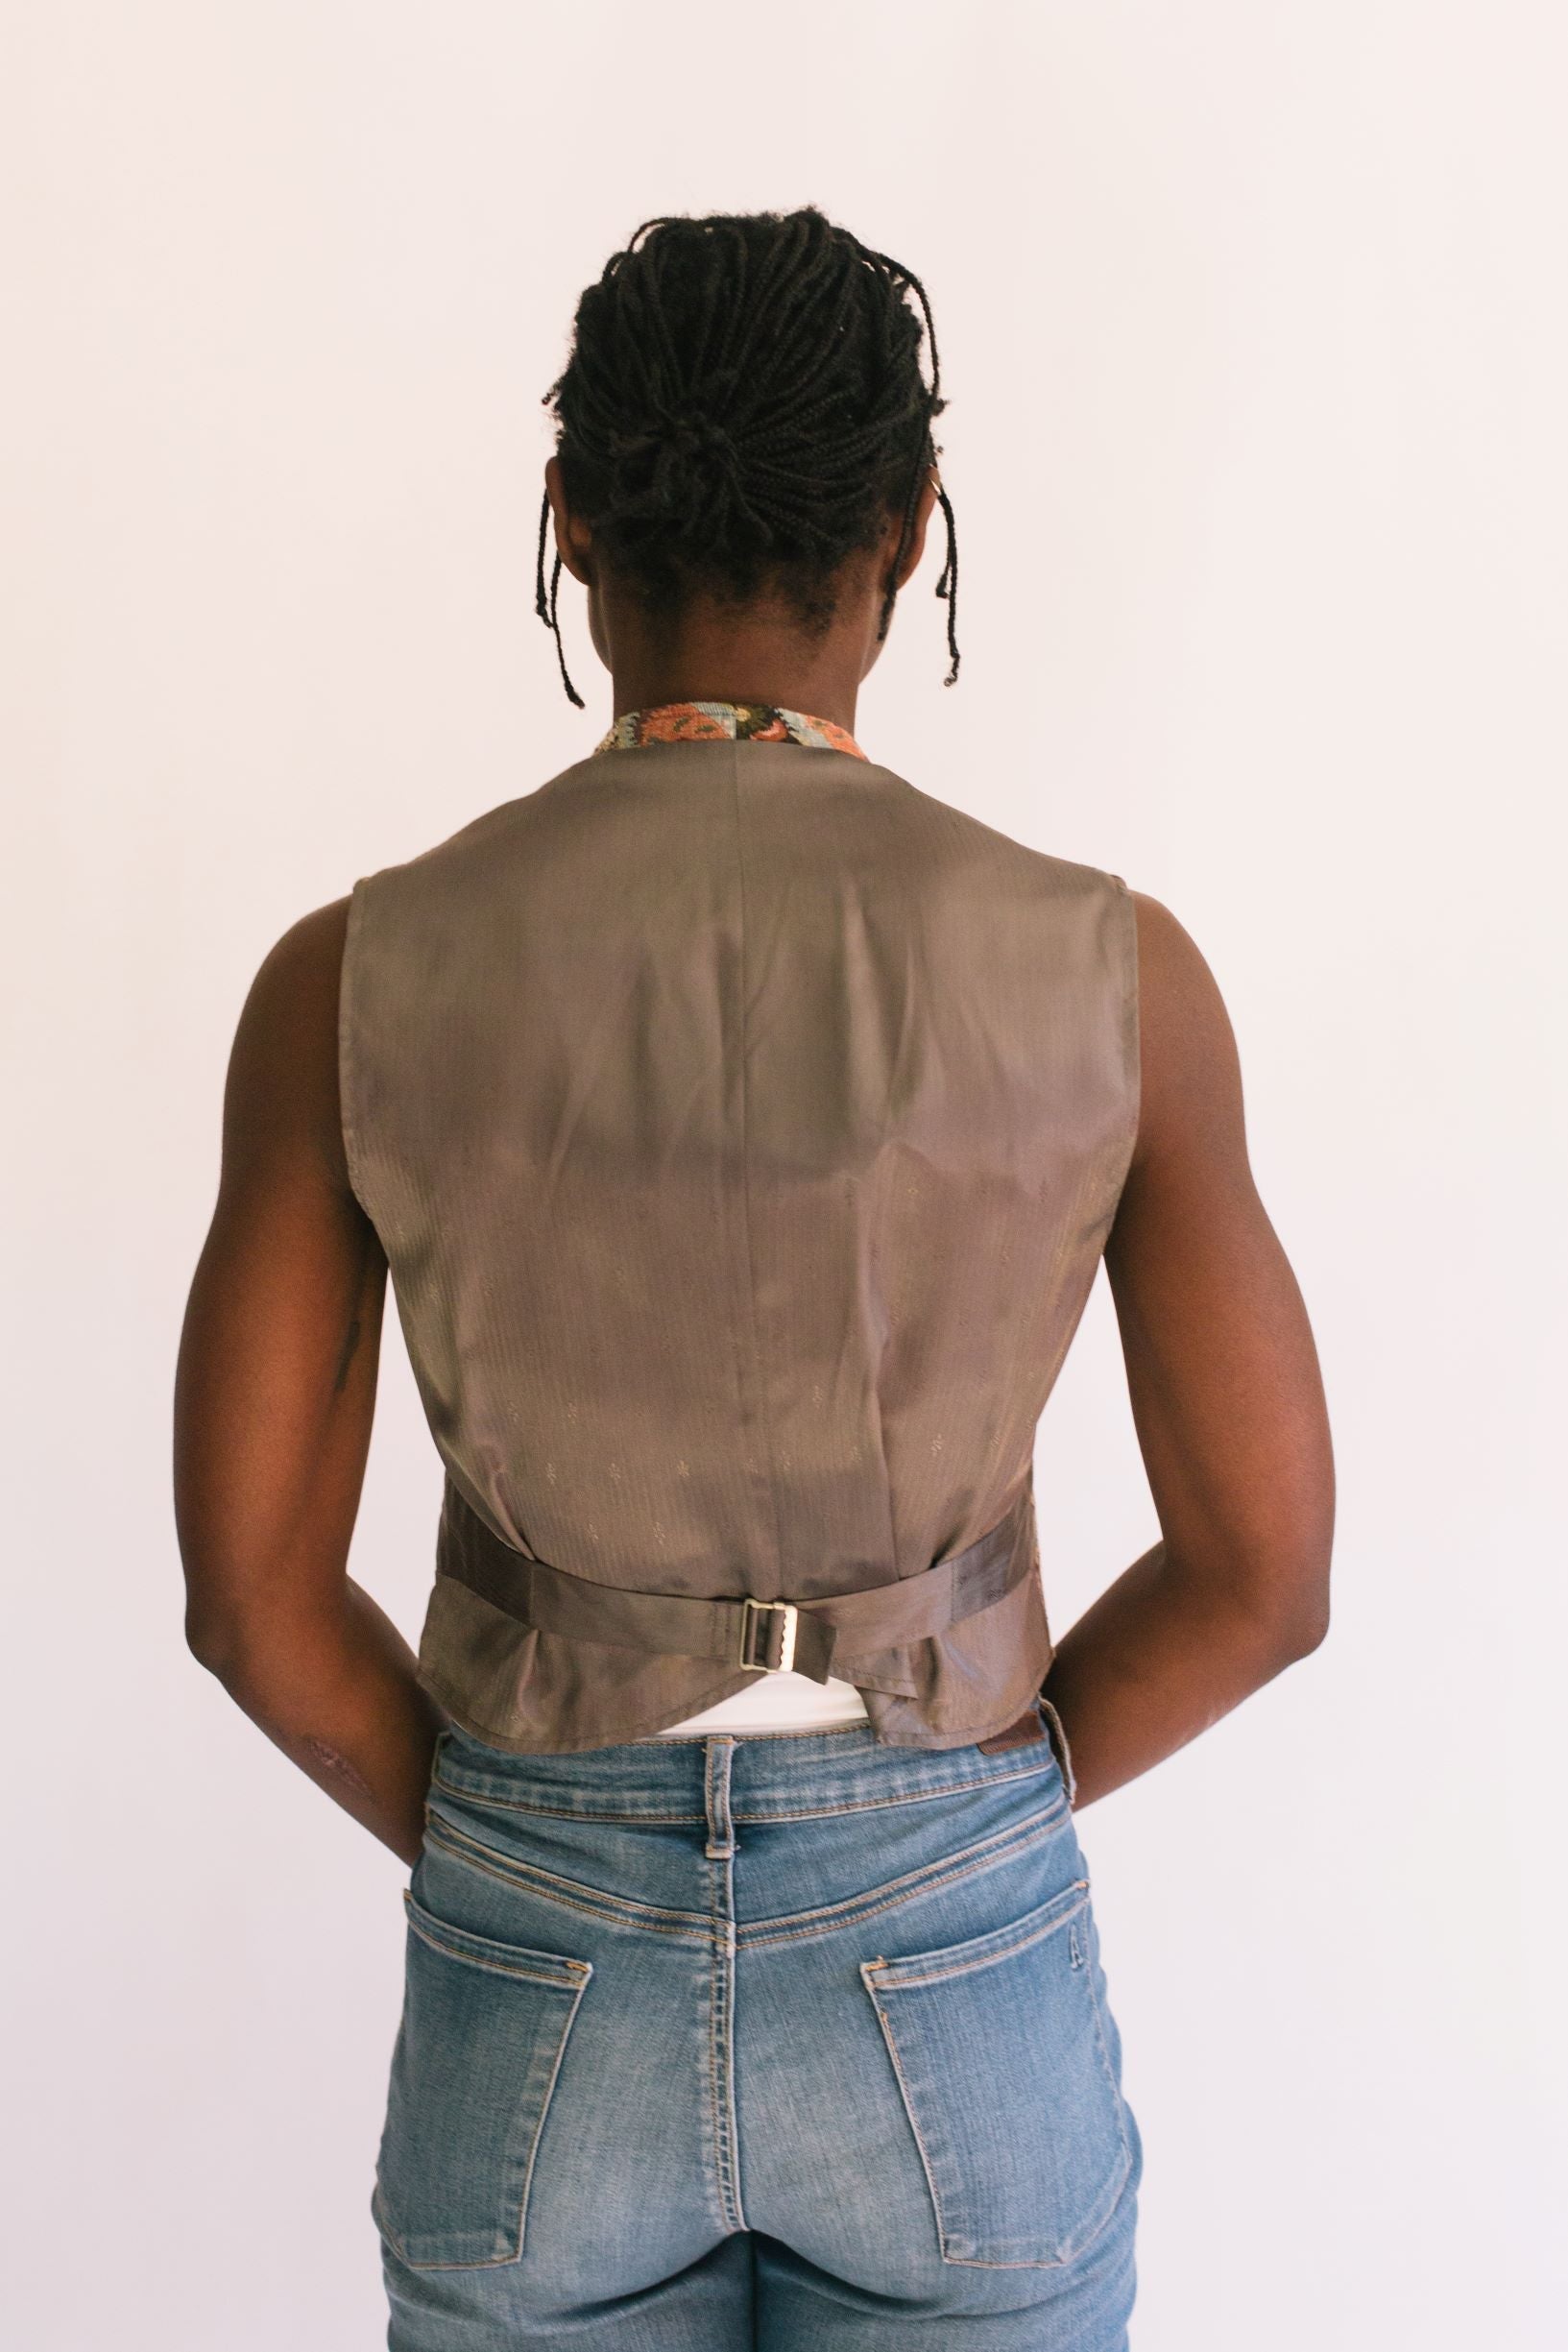 Back view of African woman standing in front of a white studio backdrop wearing View A 222 Vintage Vests, with adjustable back waist belt.